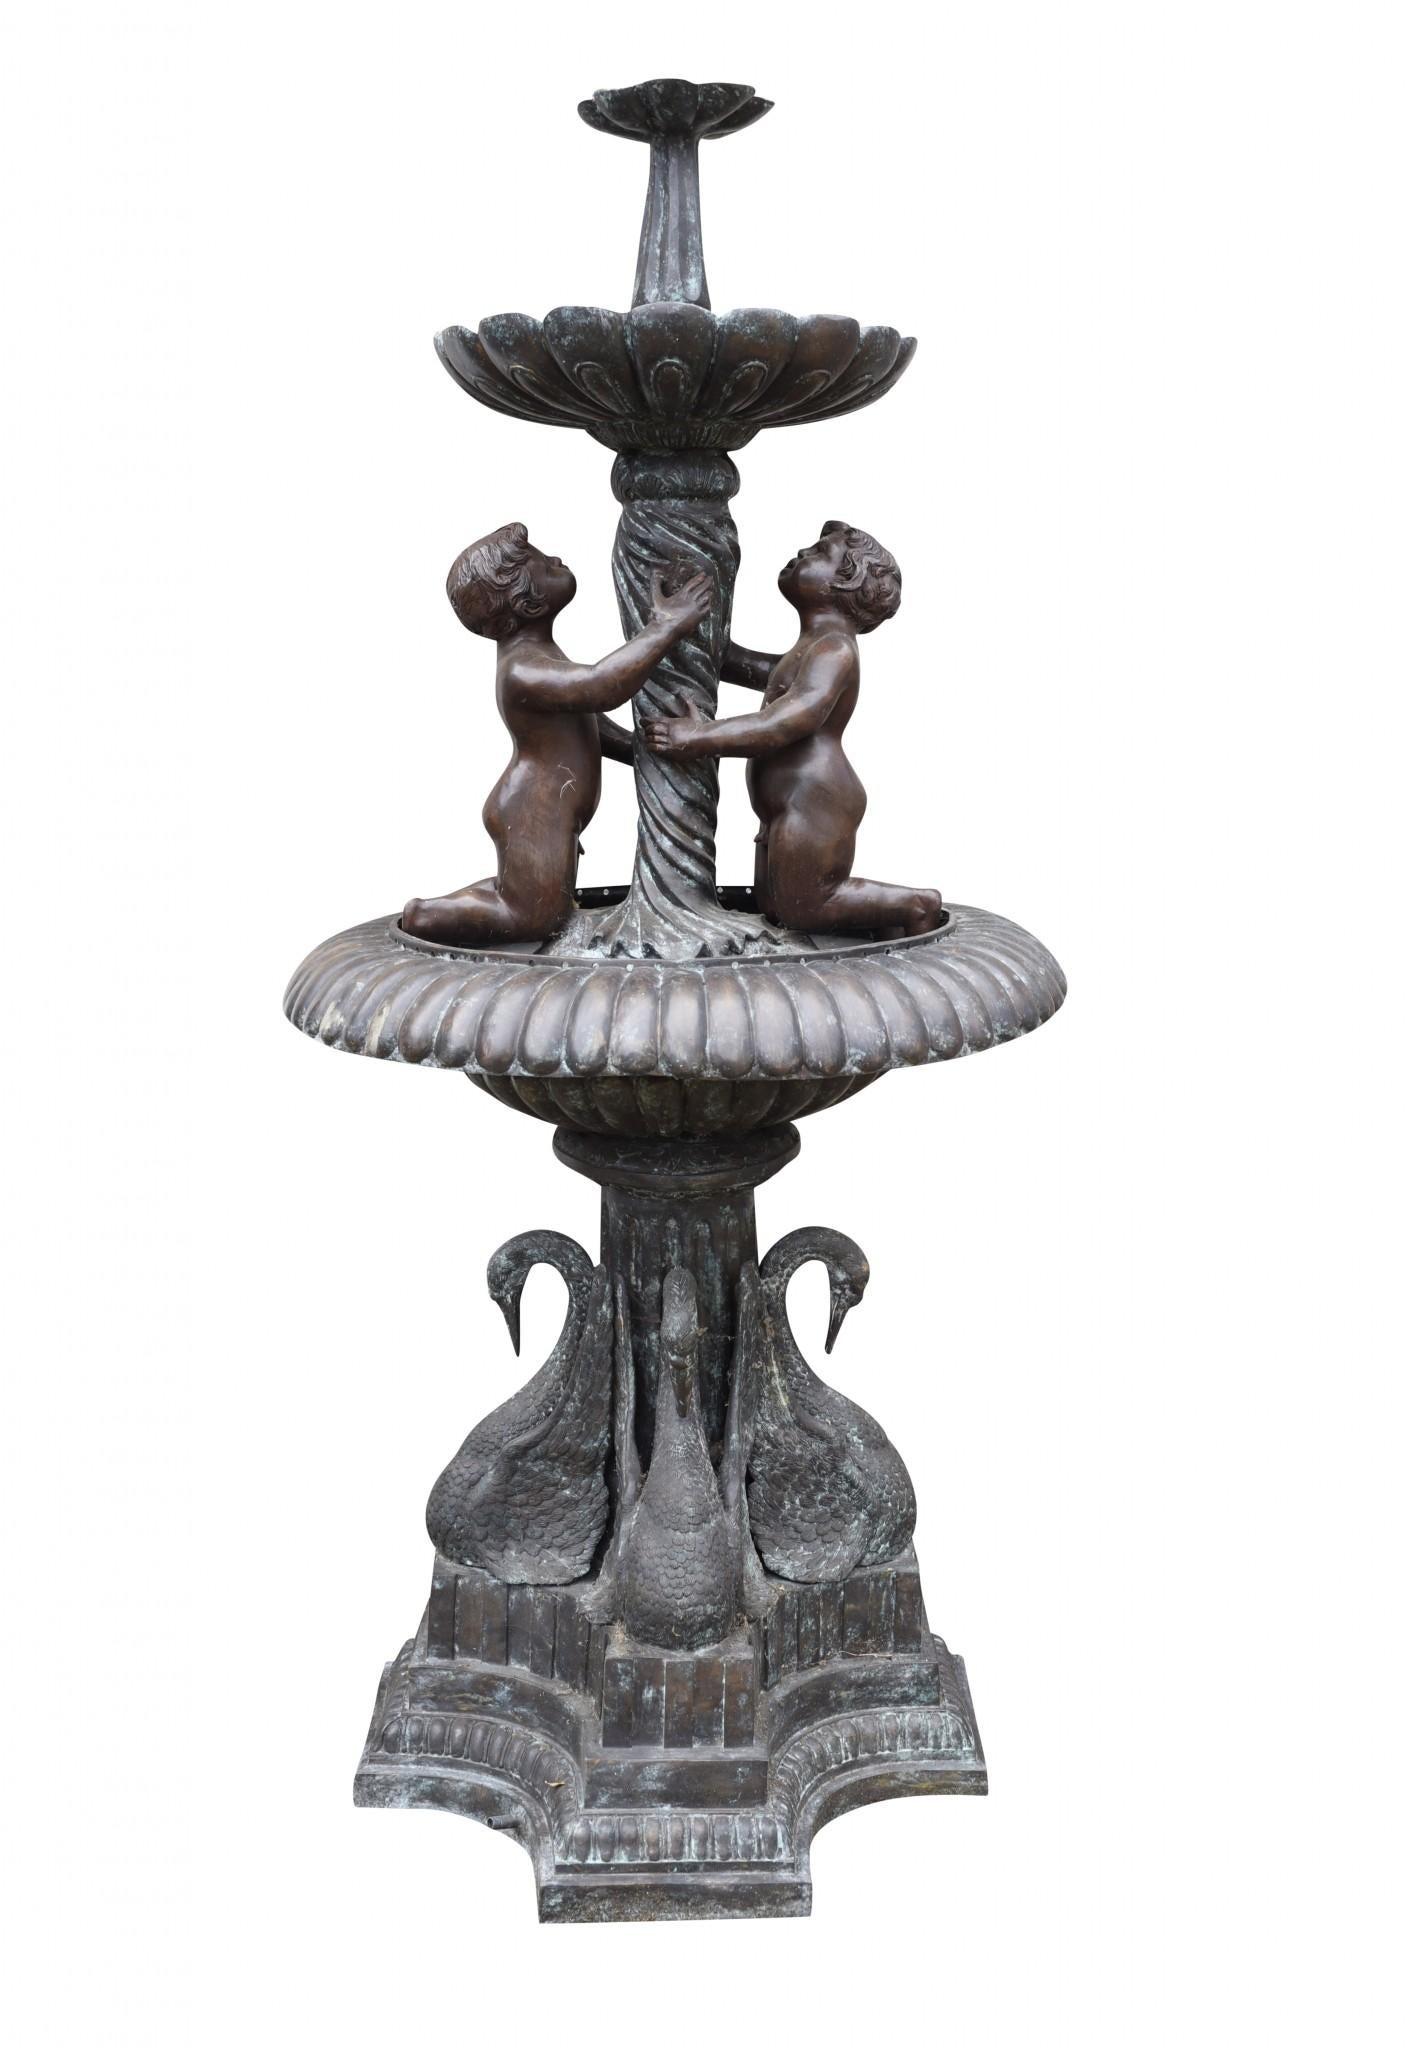 - Stunning French bronze classical fountain with swan and cherub supports
- Lovely finish with Verdis Gris finish with a grey / green patina
- Three tiers so you can only imagine how this would look with water cascading down
- Stands at 7 feet